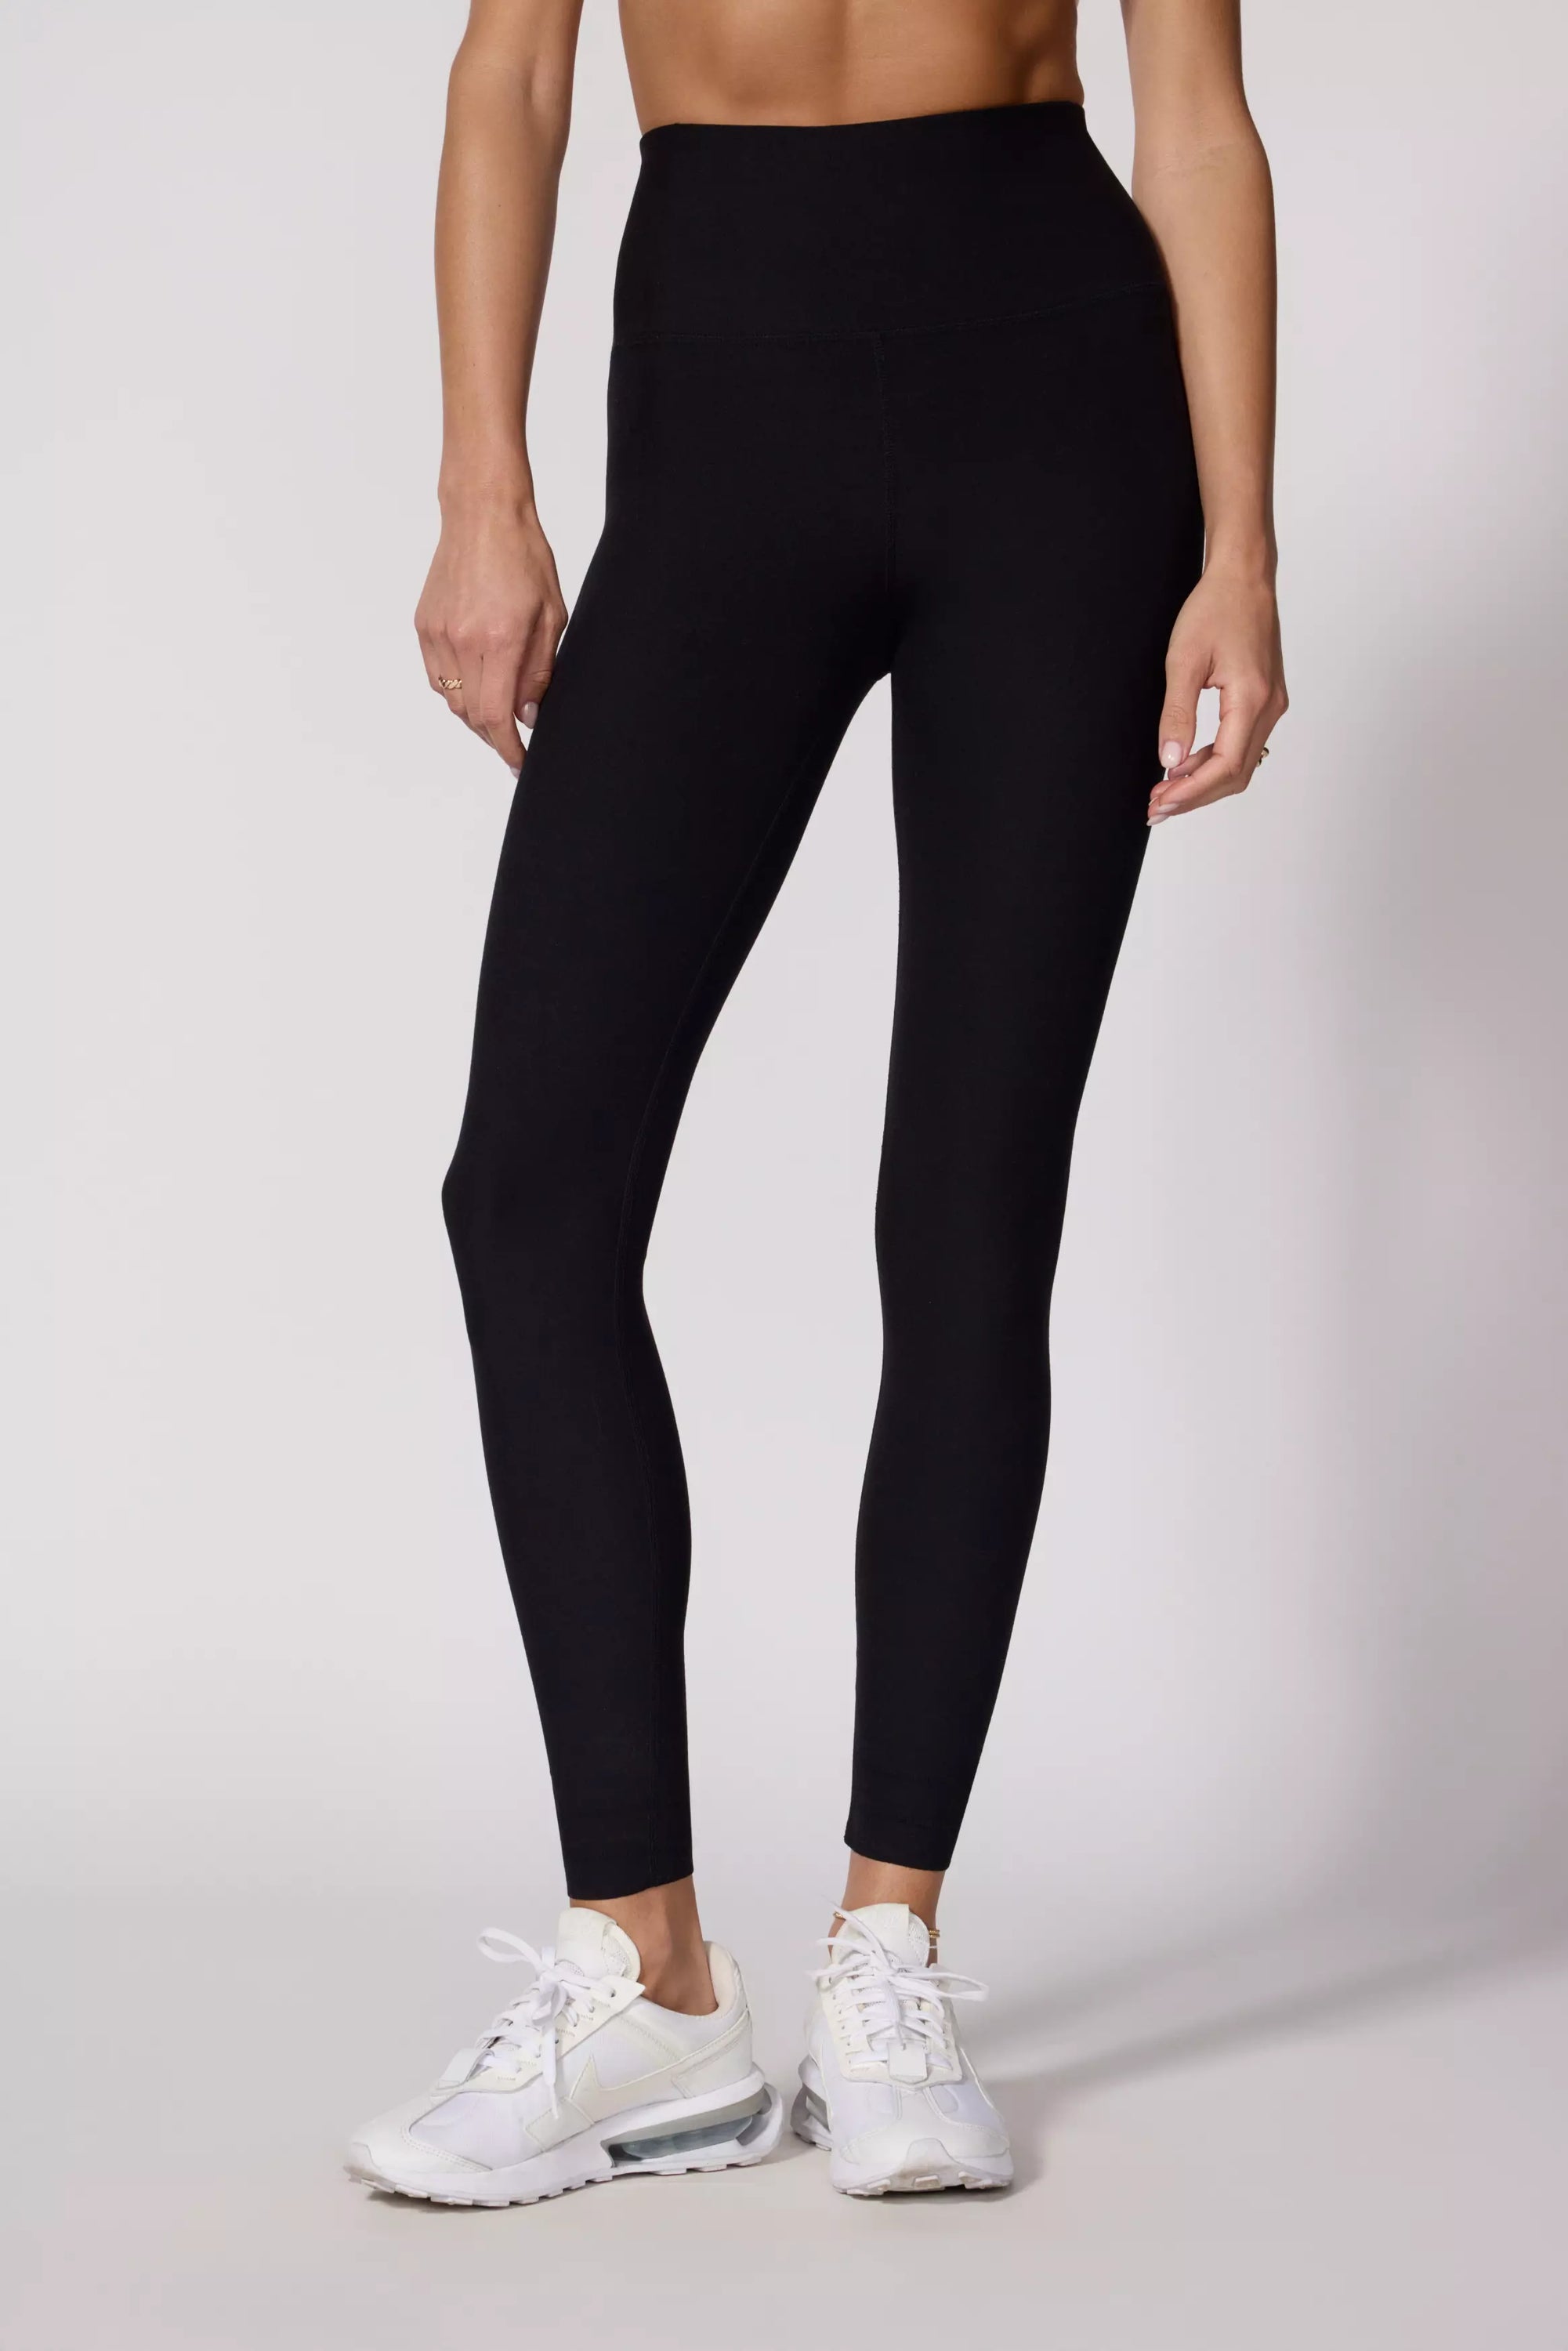 Explore High-Waisted Cut-To-Length Legging 27" Peached